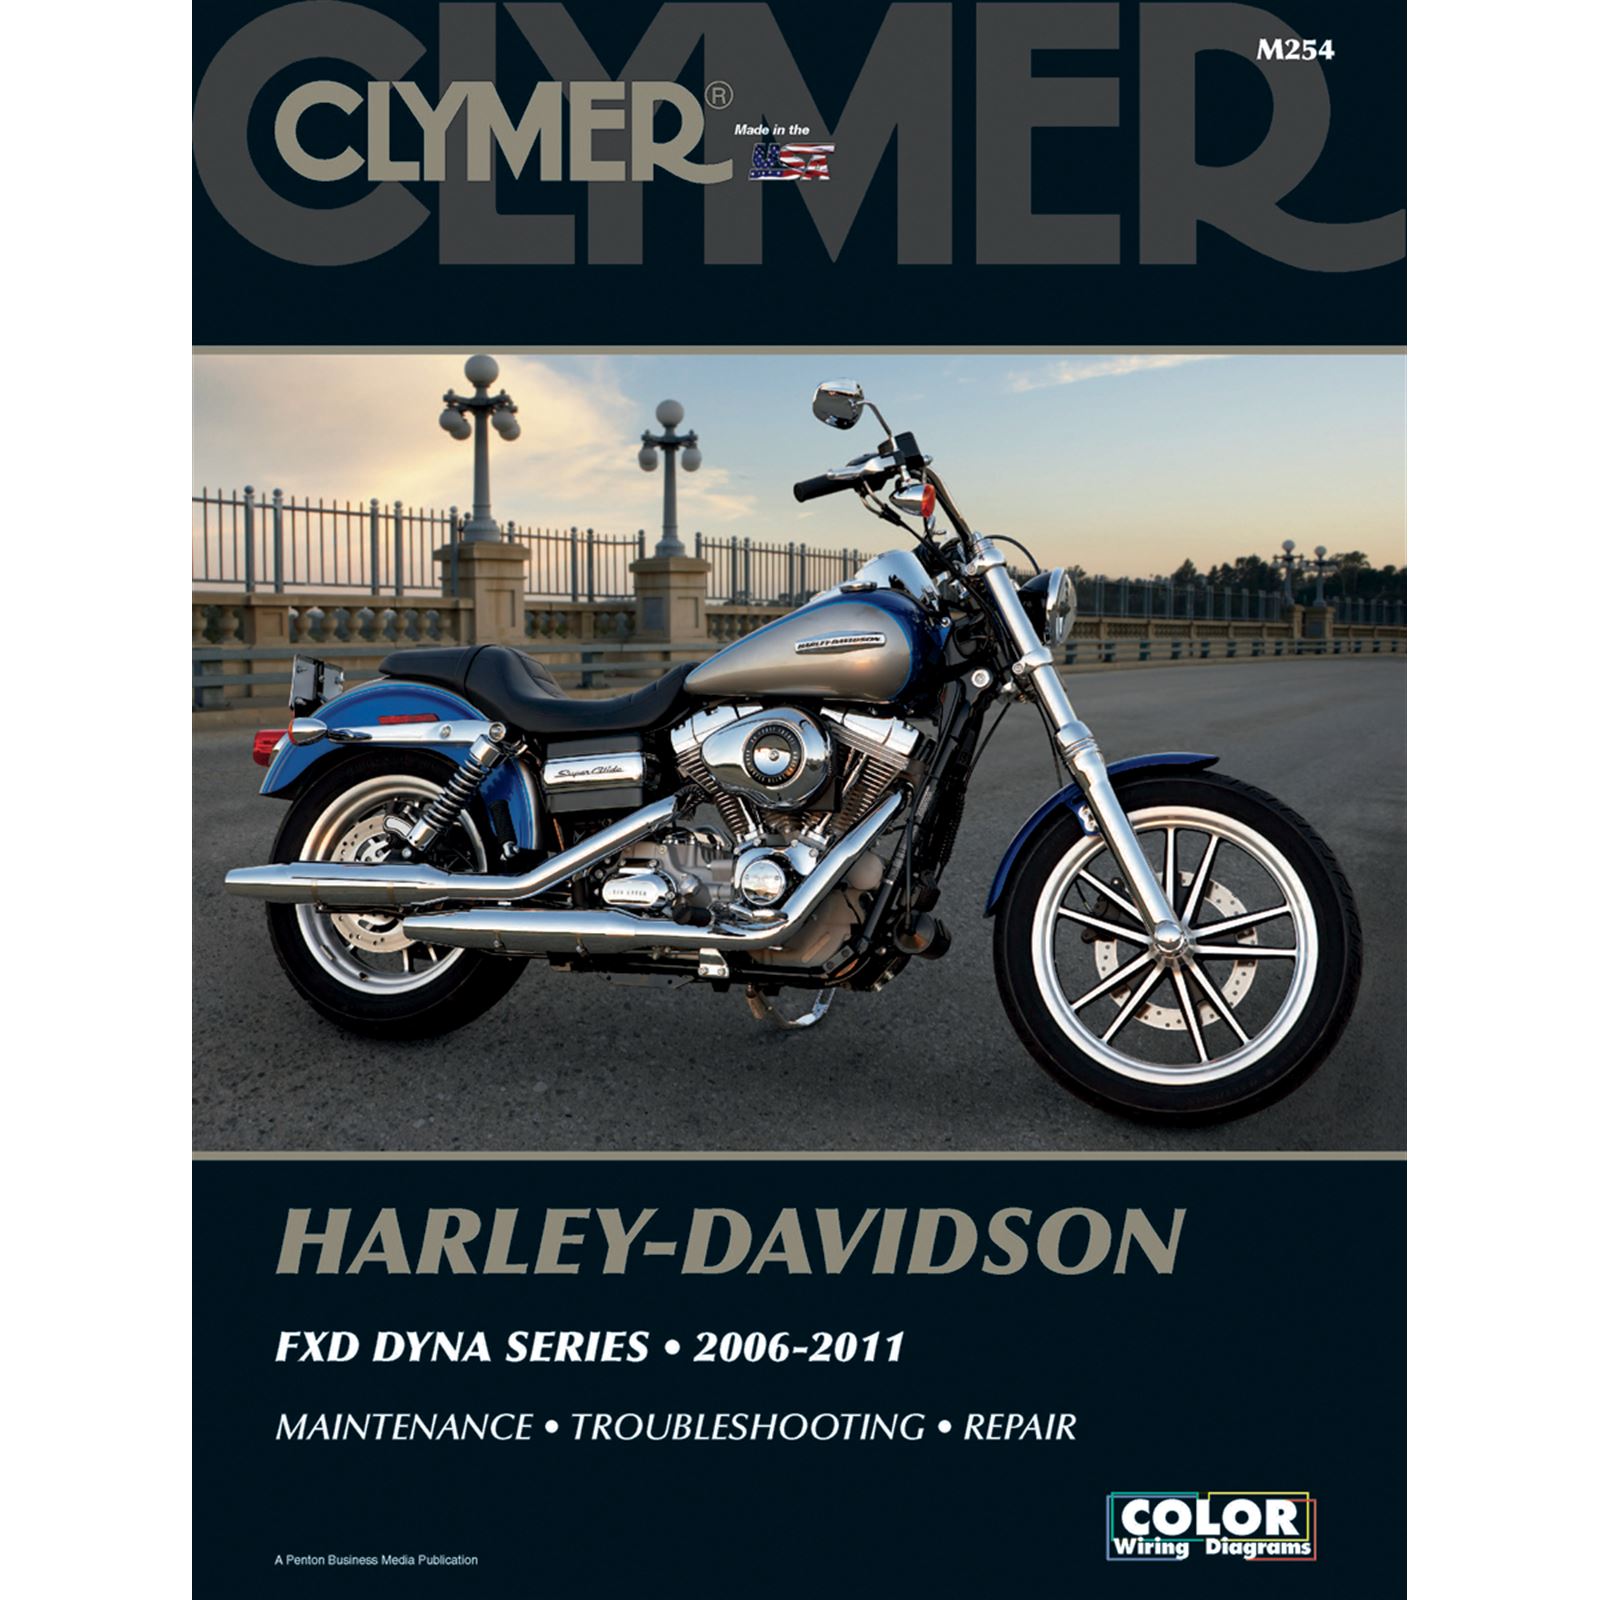 Clymer Manual - FXD Dyna Series